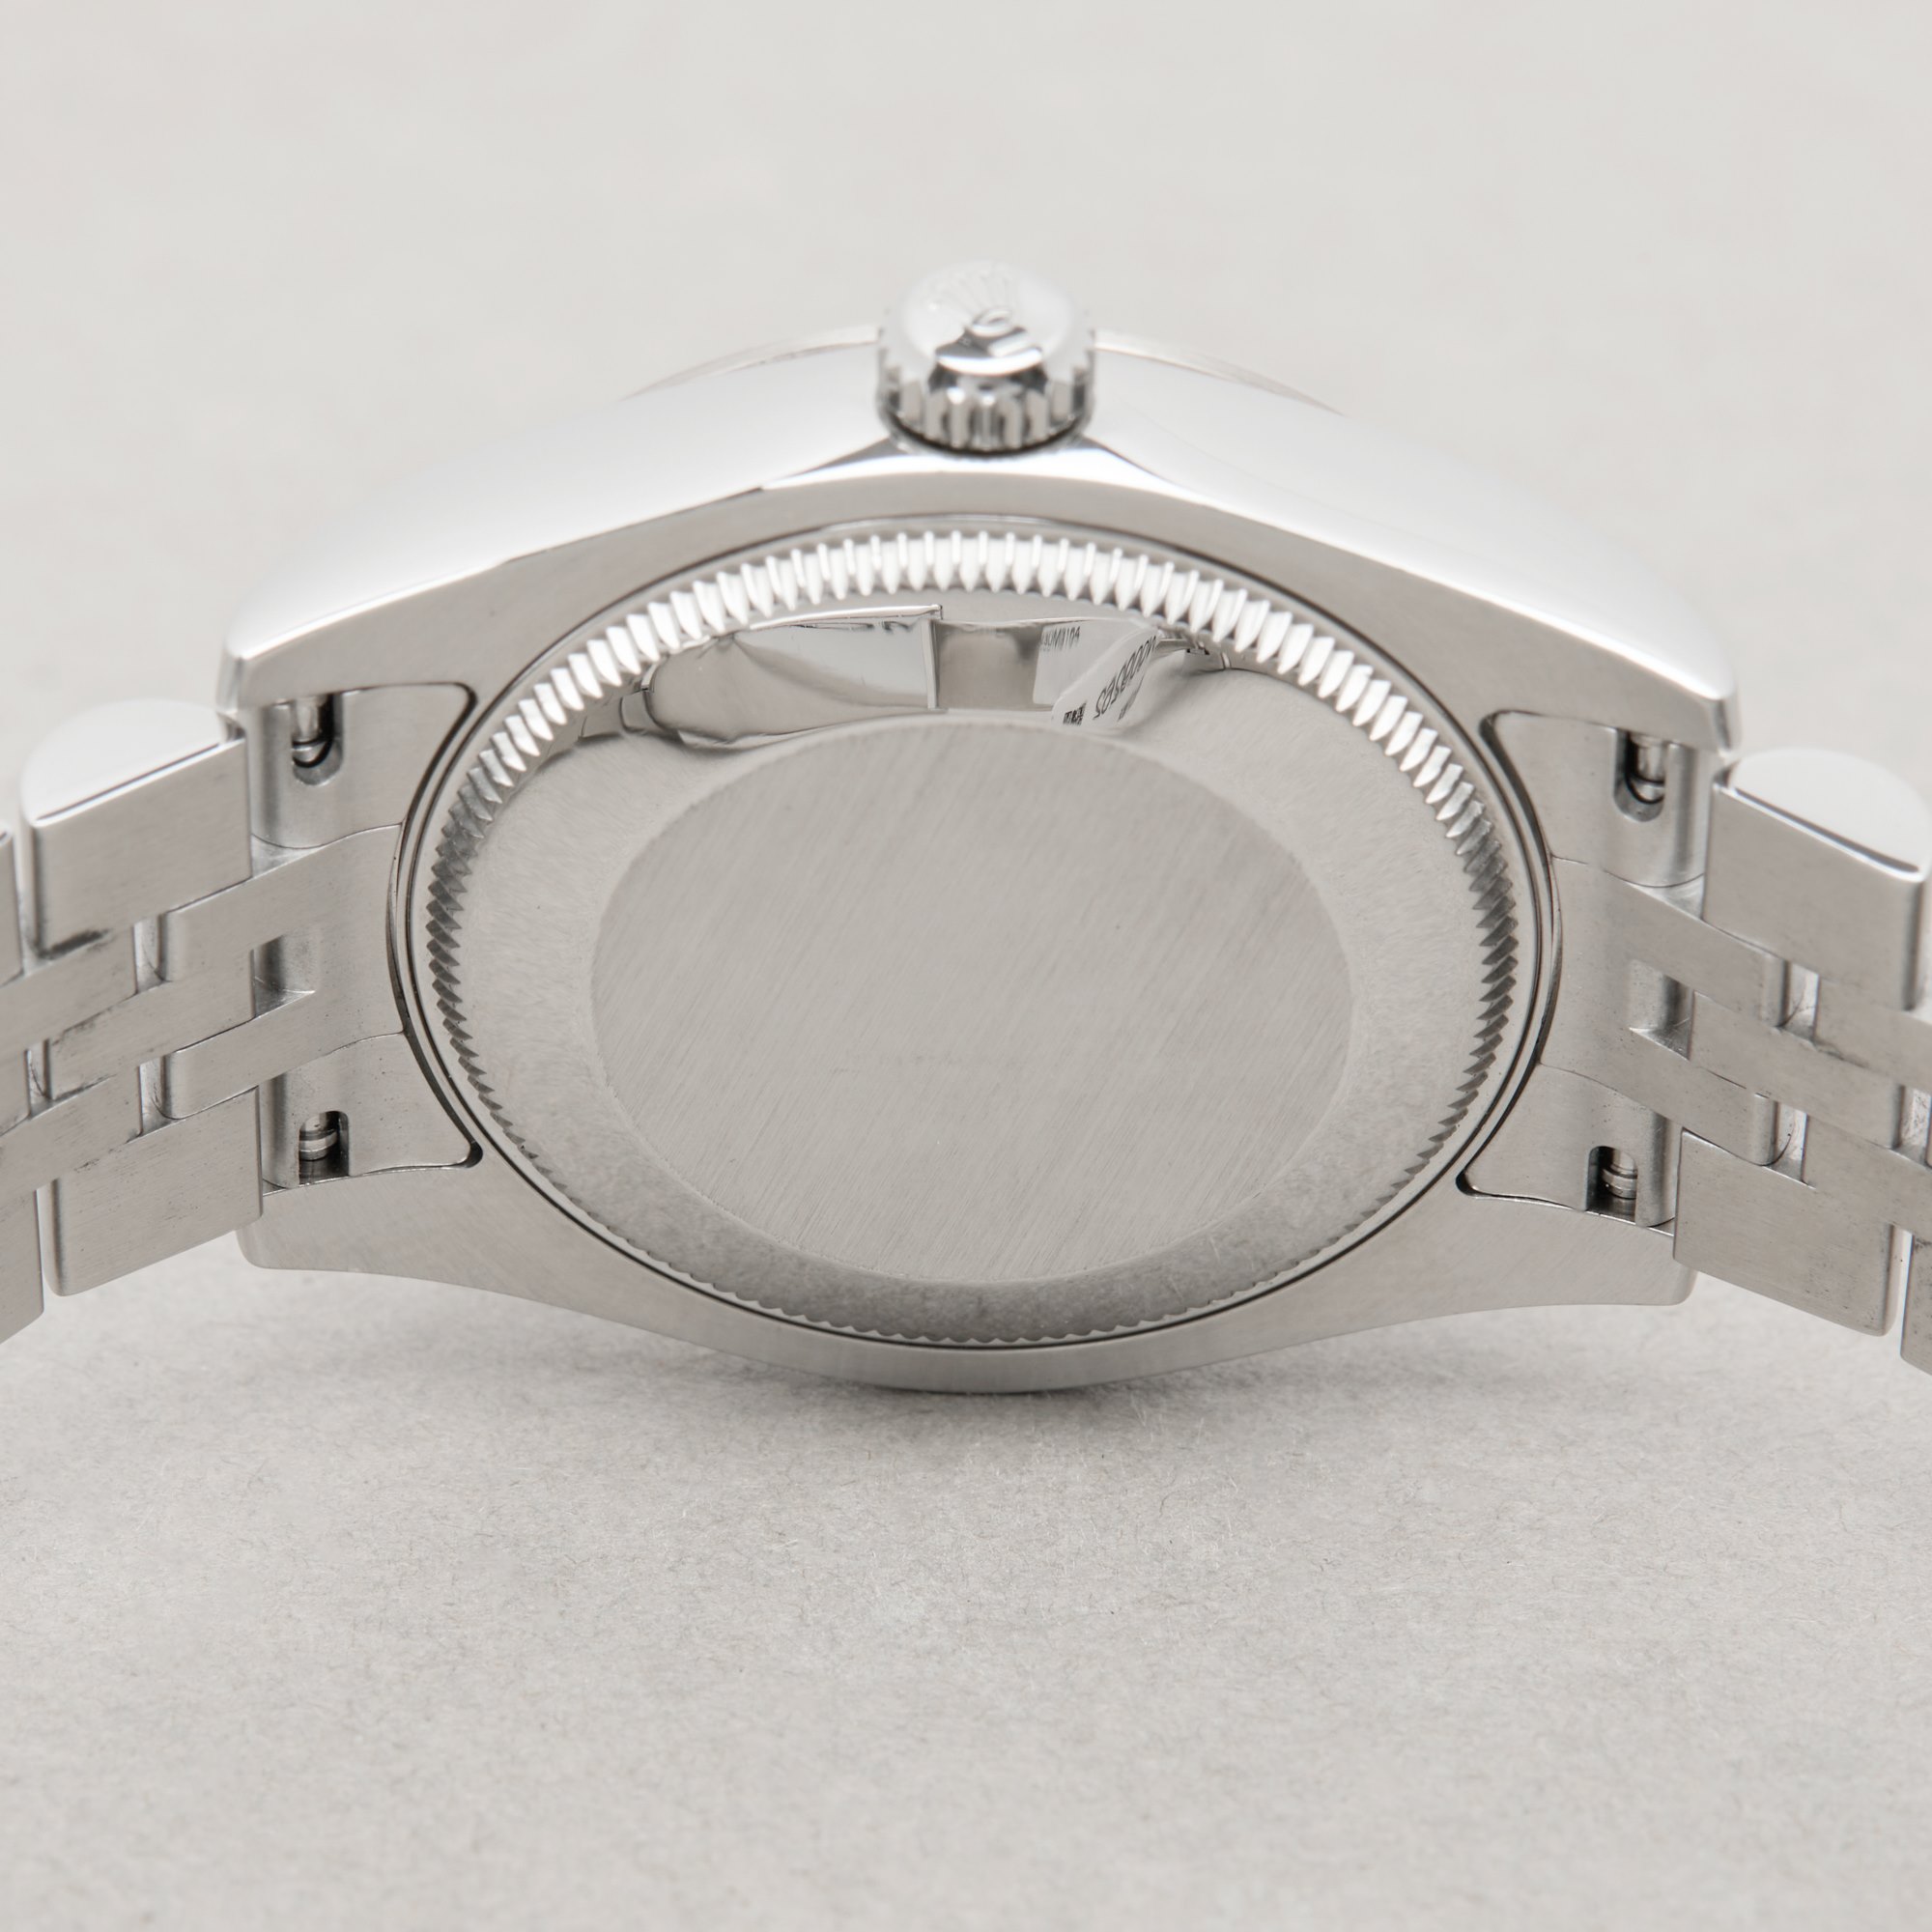 Rolex Datejust White Gold & Stainless Steel 178274